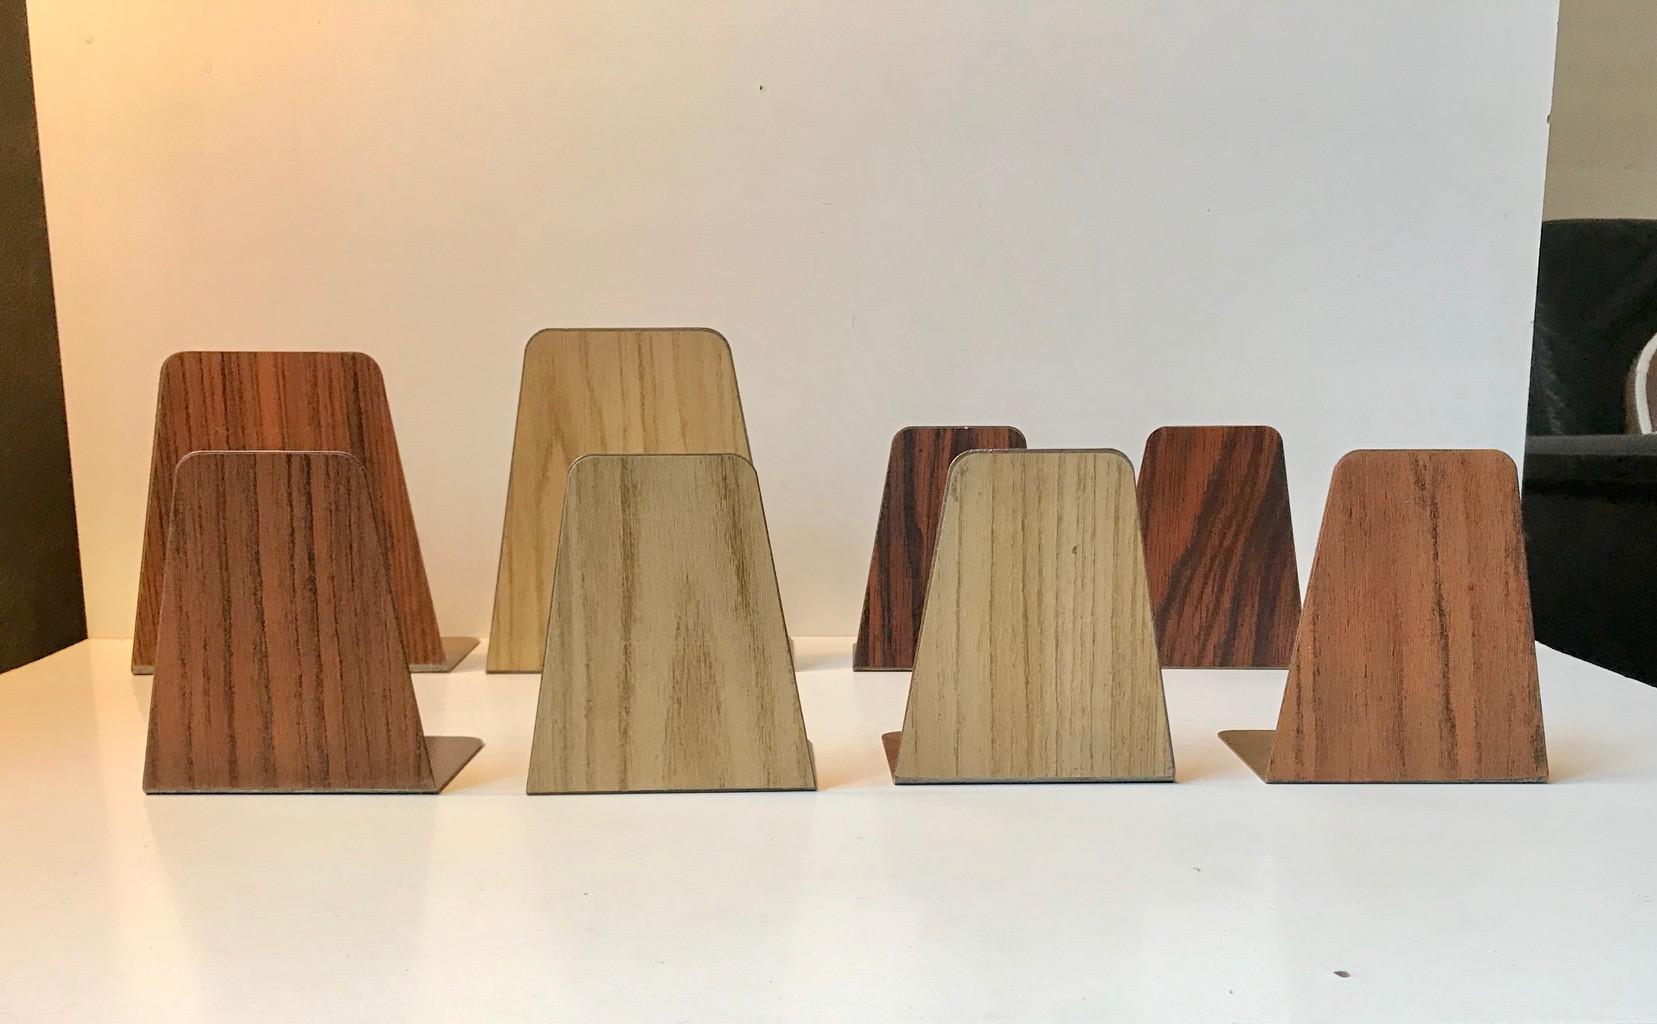 A set of 8 enameled steel bookends with applied teak, oak and rosewood superficial veneer/foil. Manufactured in Denmark during the 1960s in a style reminiscent of FM Møbler. Two of them are slightly higher, deeper and wider than the 6 regular ones.